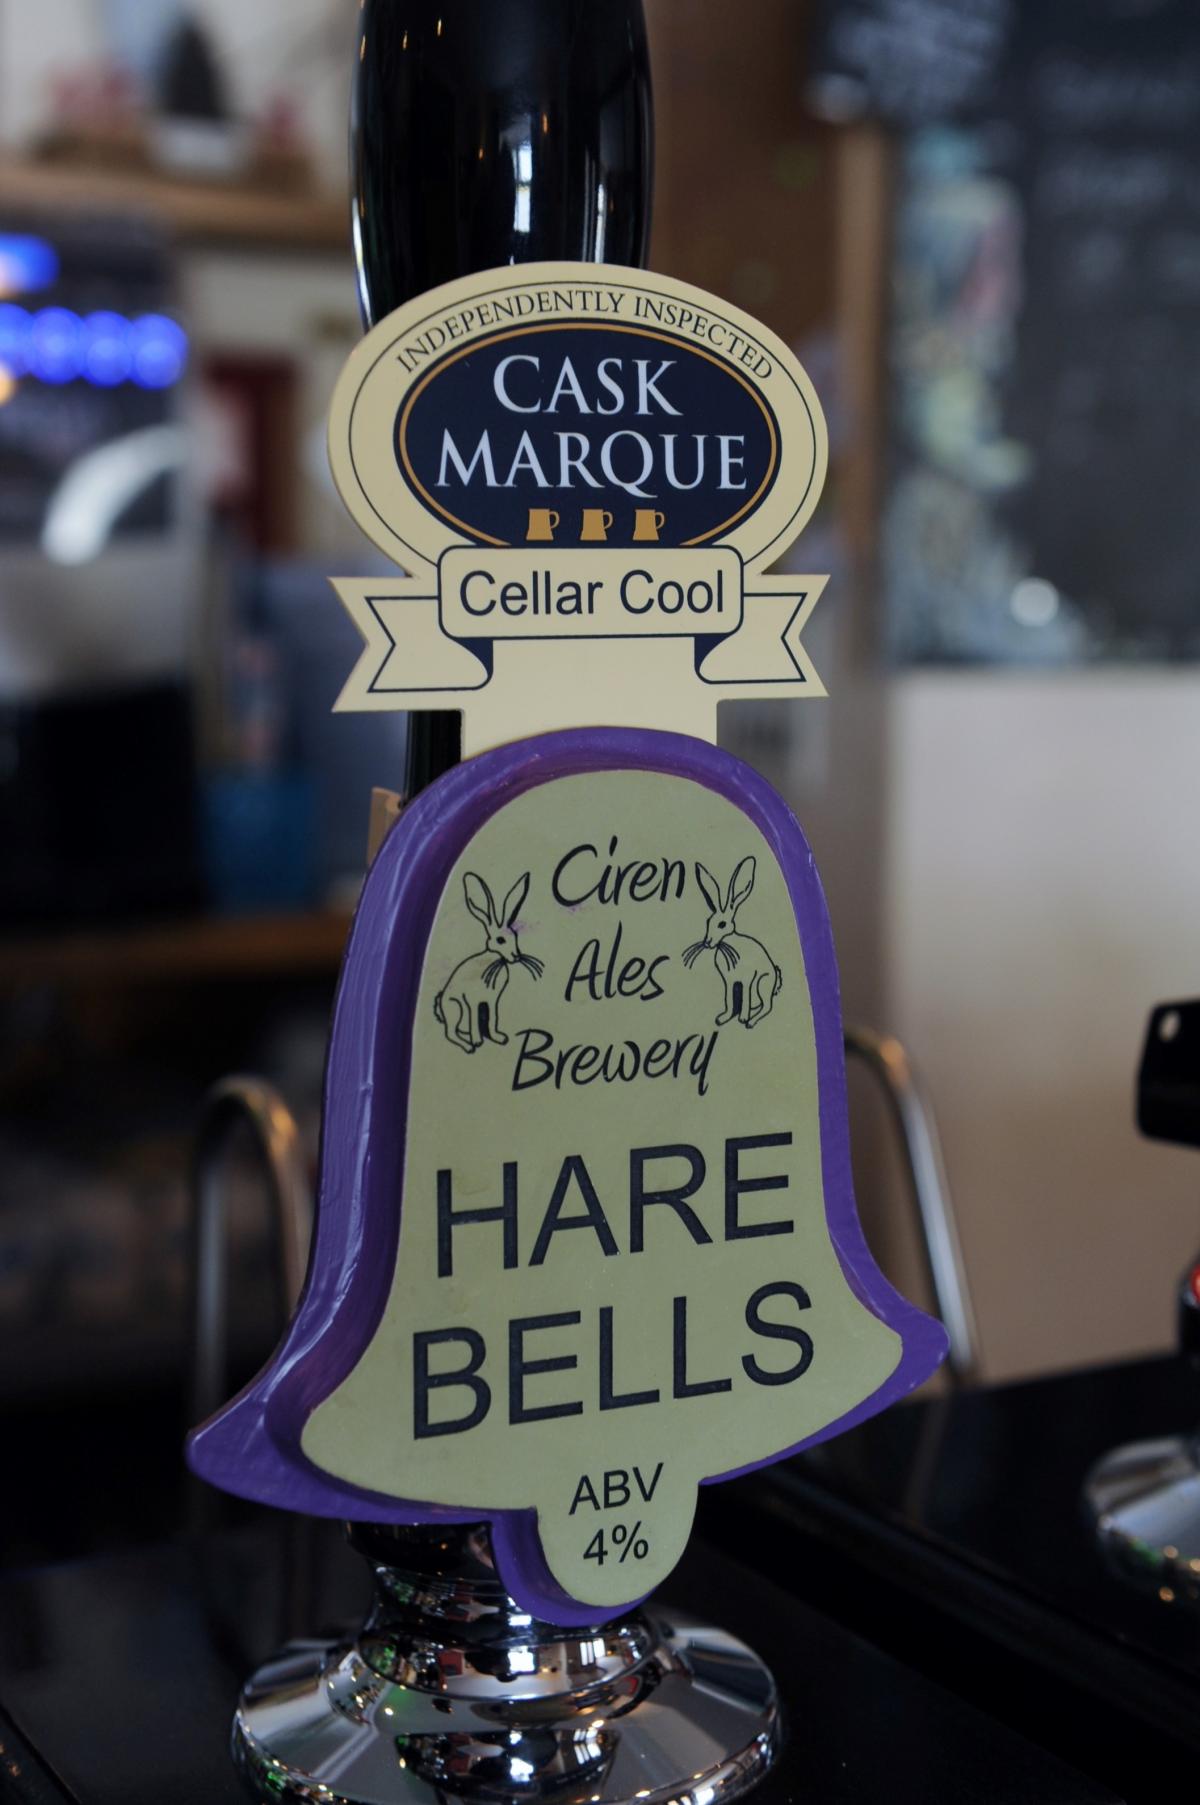 The special Hare Bells brew made at the Twelve Bells in Cirencester to celebrate the Hare Festival